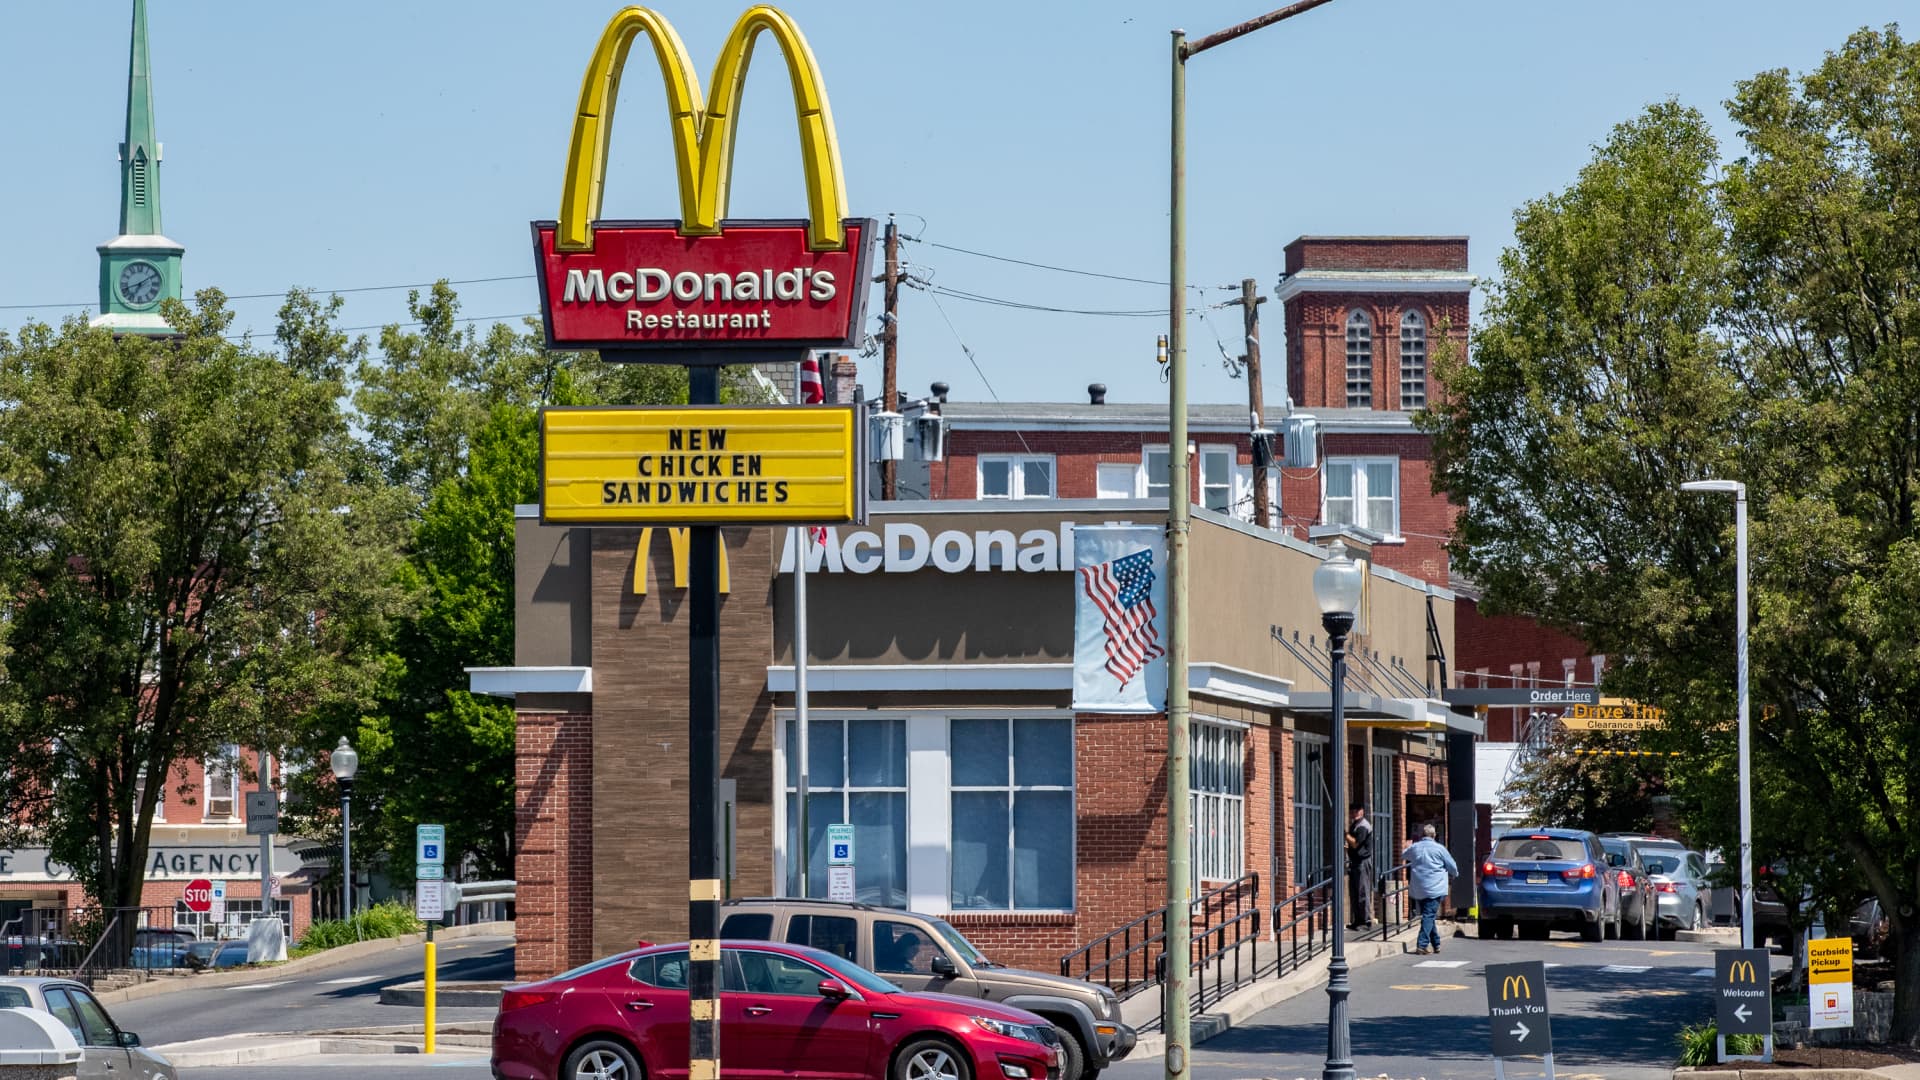 McDonald's to raise royalty fees for new franchised restaurants for first time in nearly 30 years